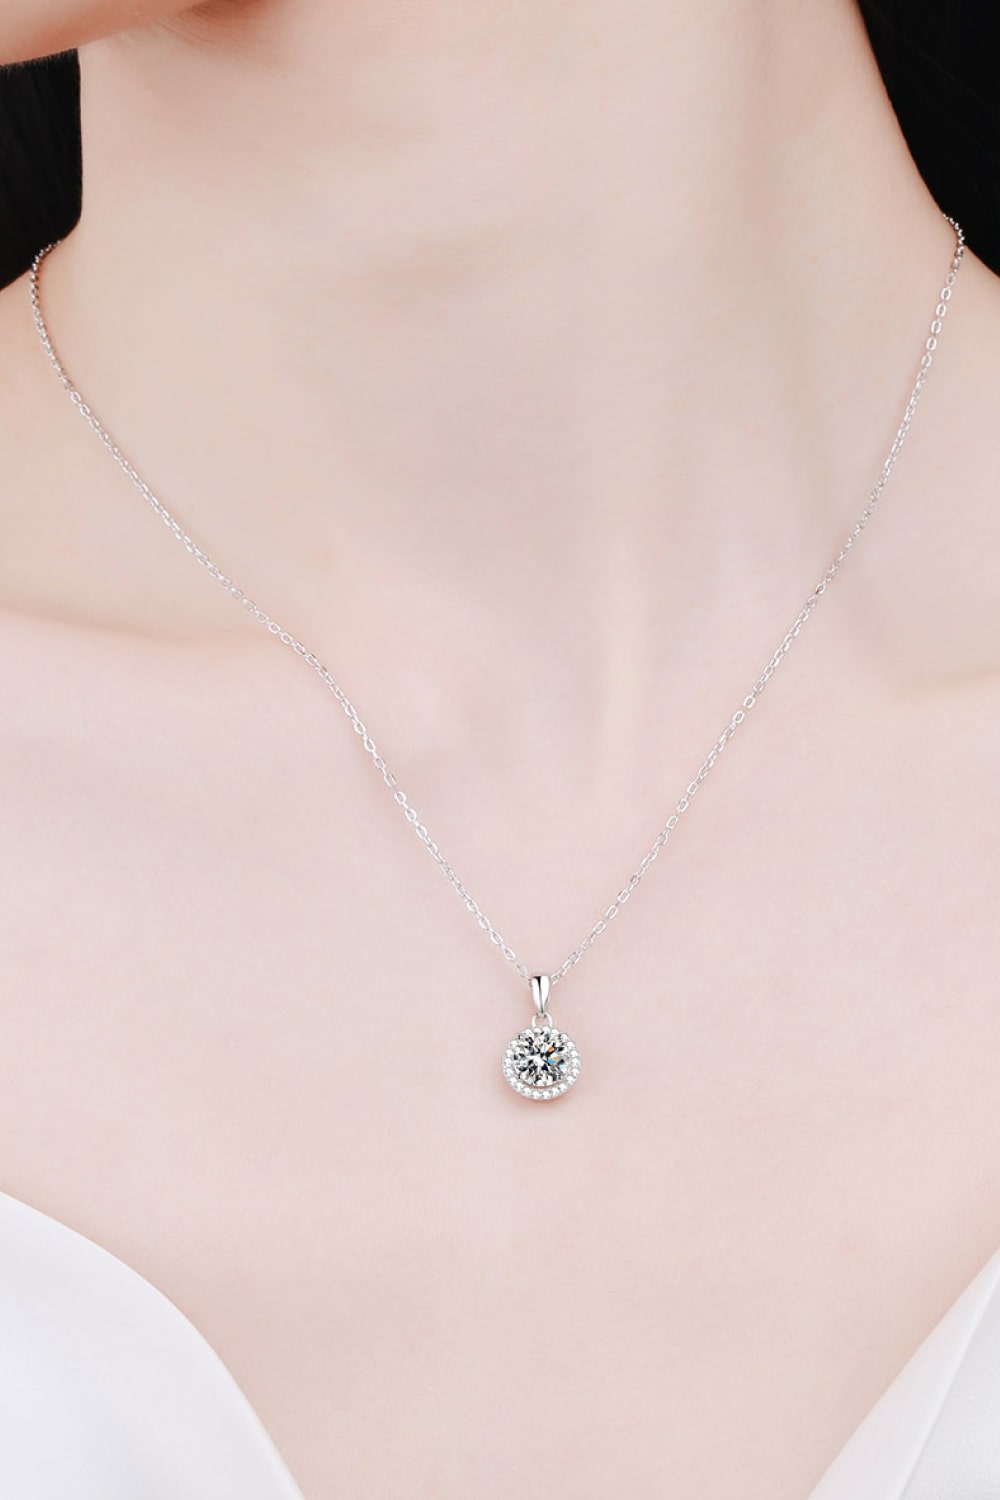 Chance To Charm 1 Carat Moissanite Round Pendant Chain Necklace